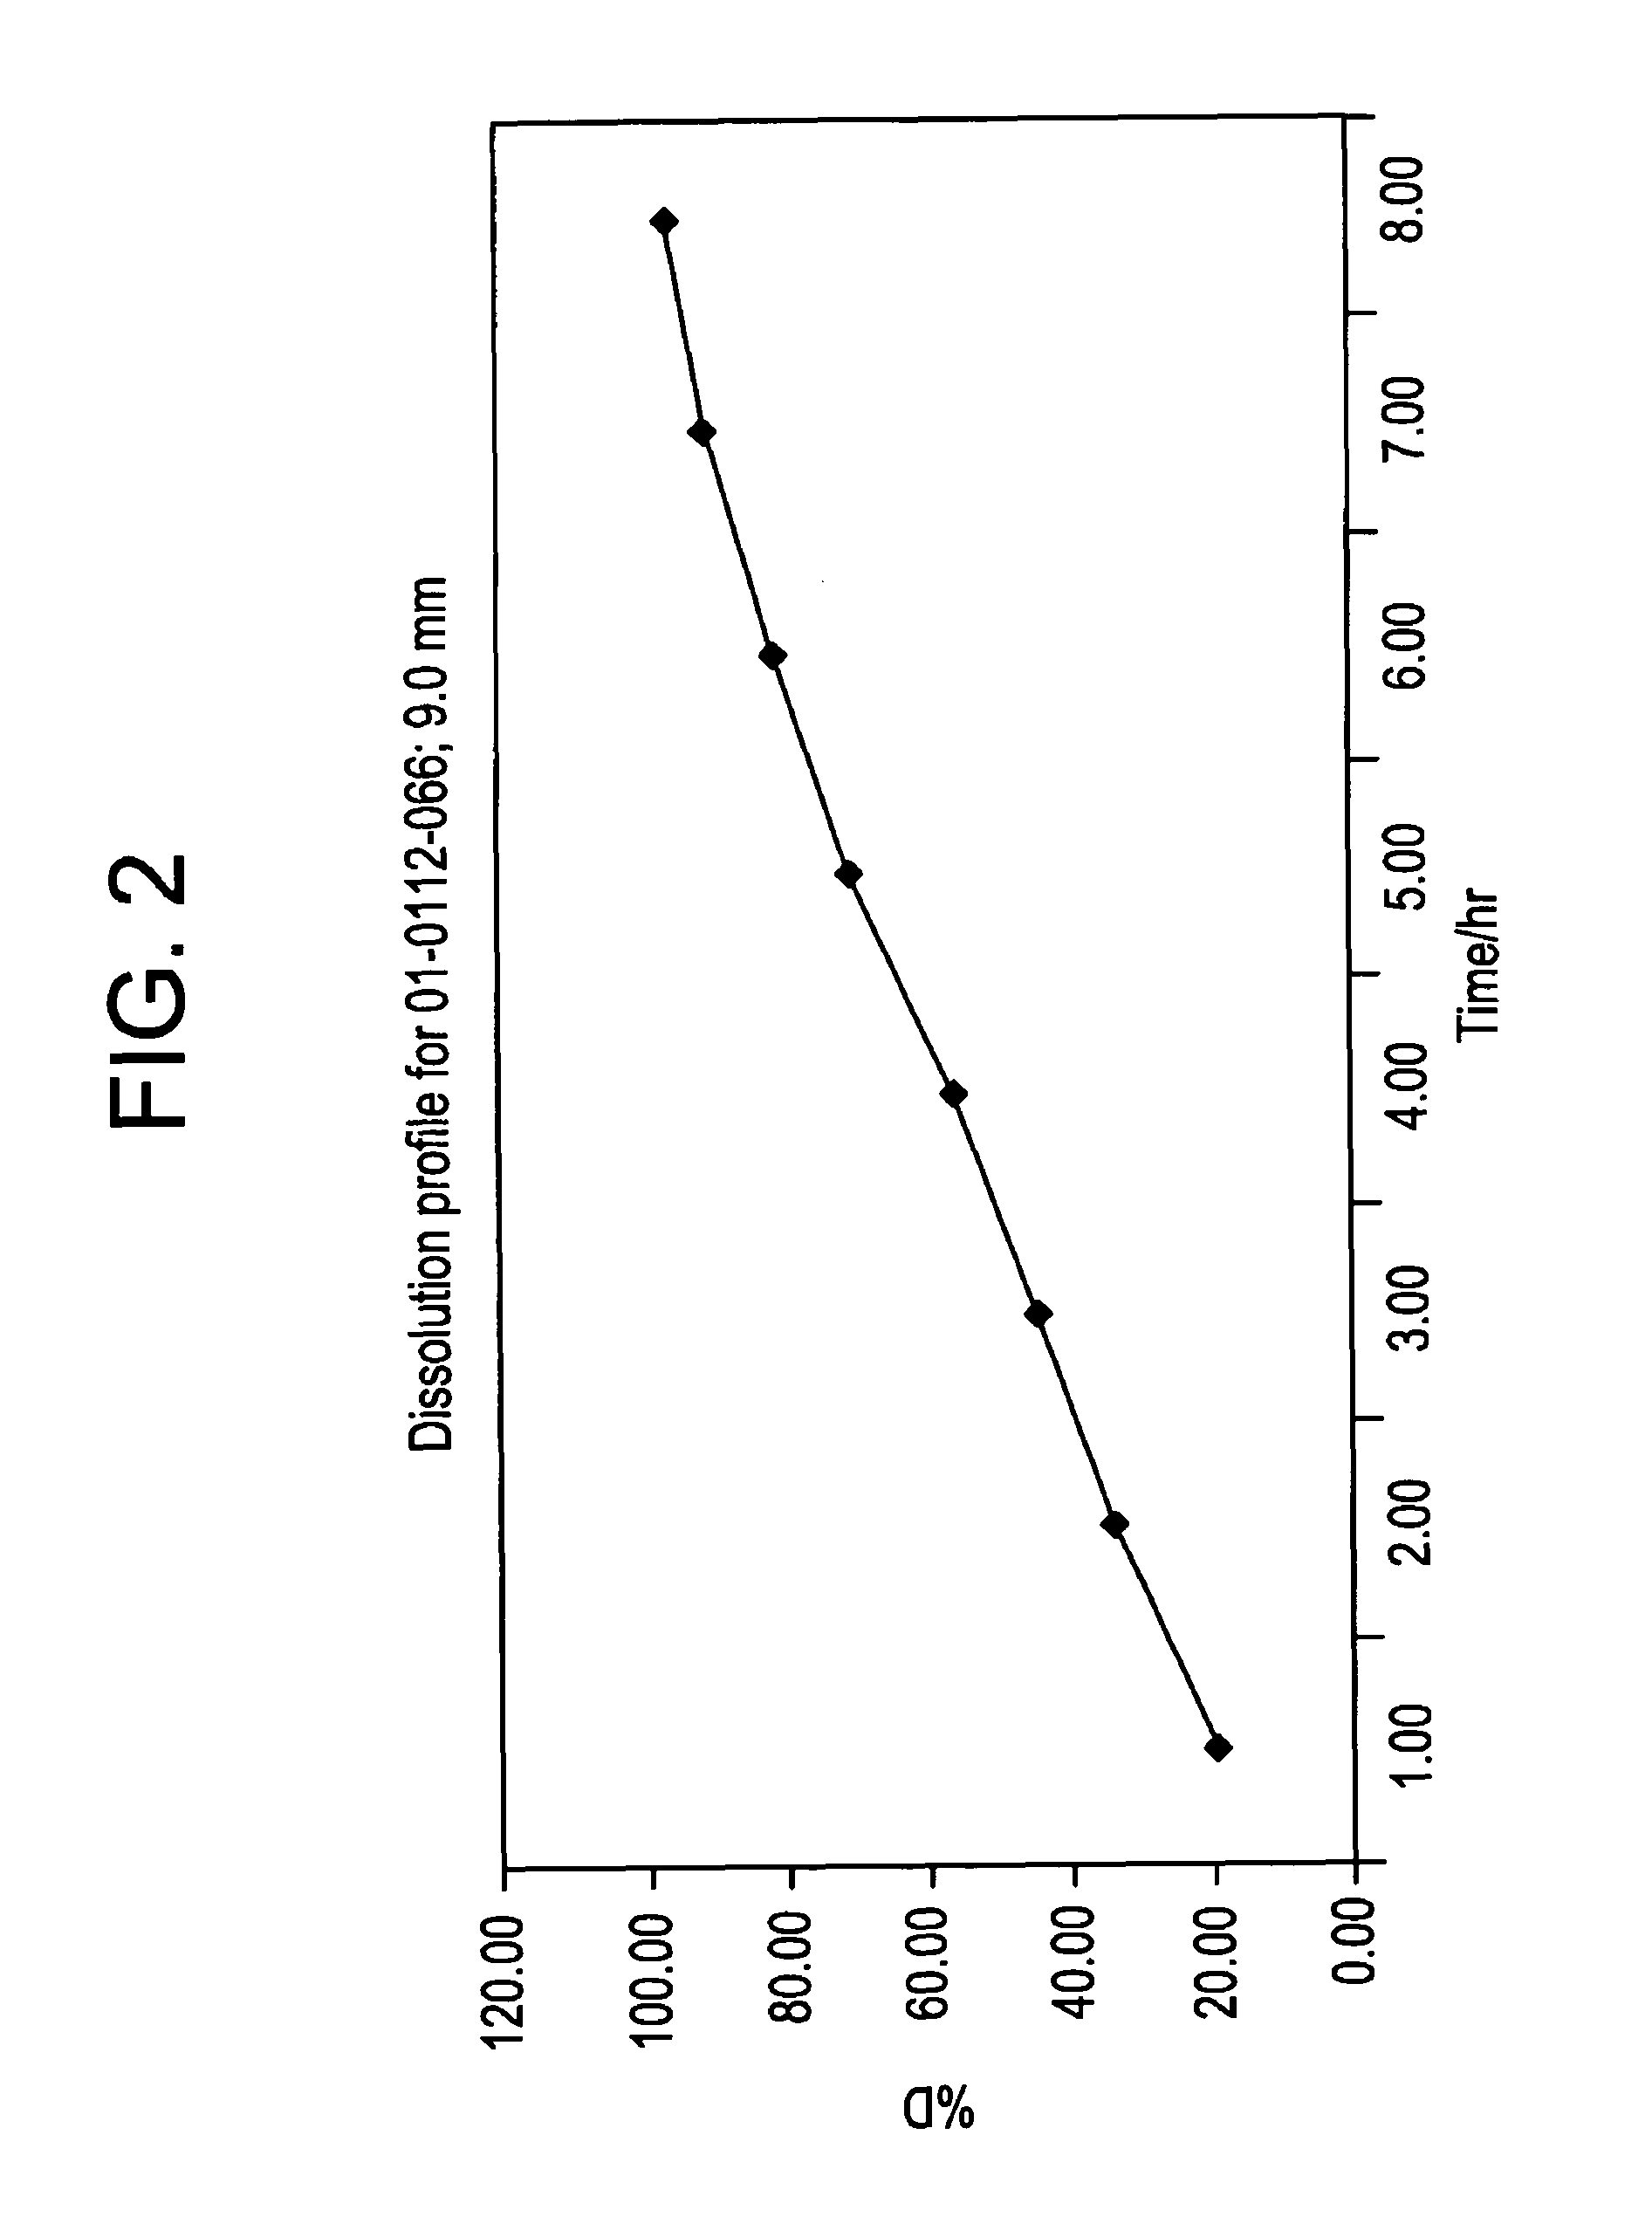 Morphine polymer release system